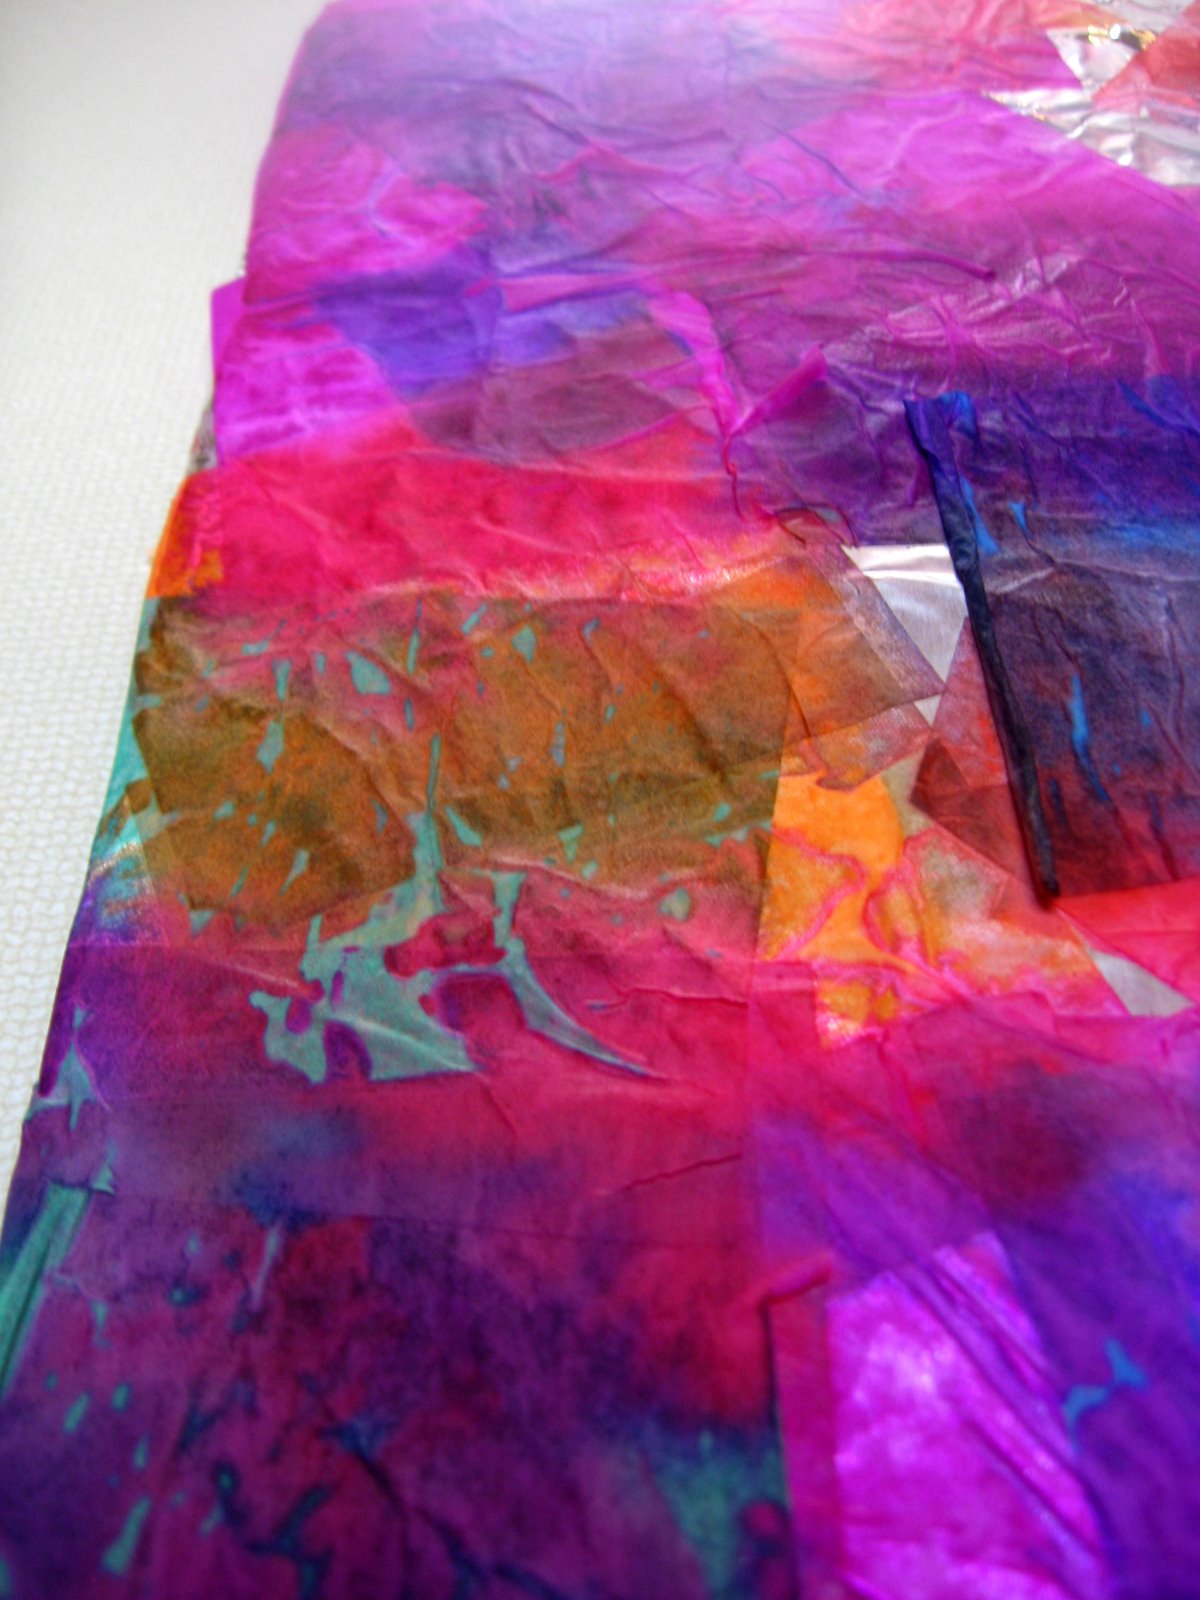 Tissue Paper Art Projects 8